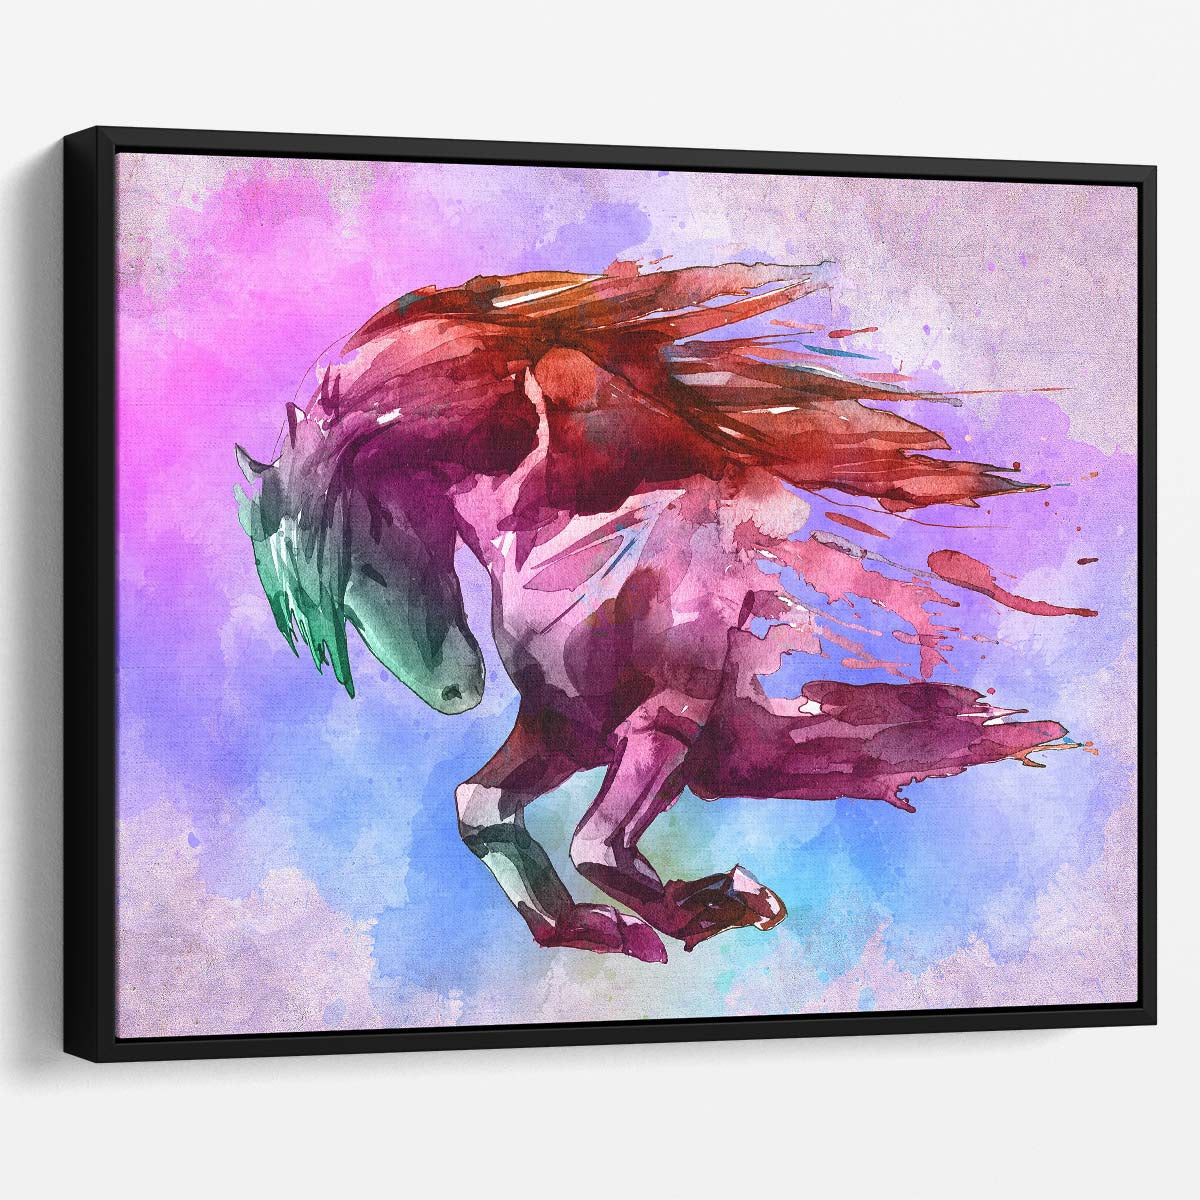 Red Horse Watercolor Painting Wall Art by Luxuriance Designs. Made in USA.